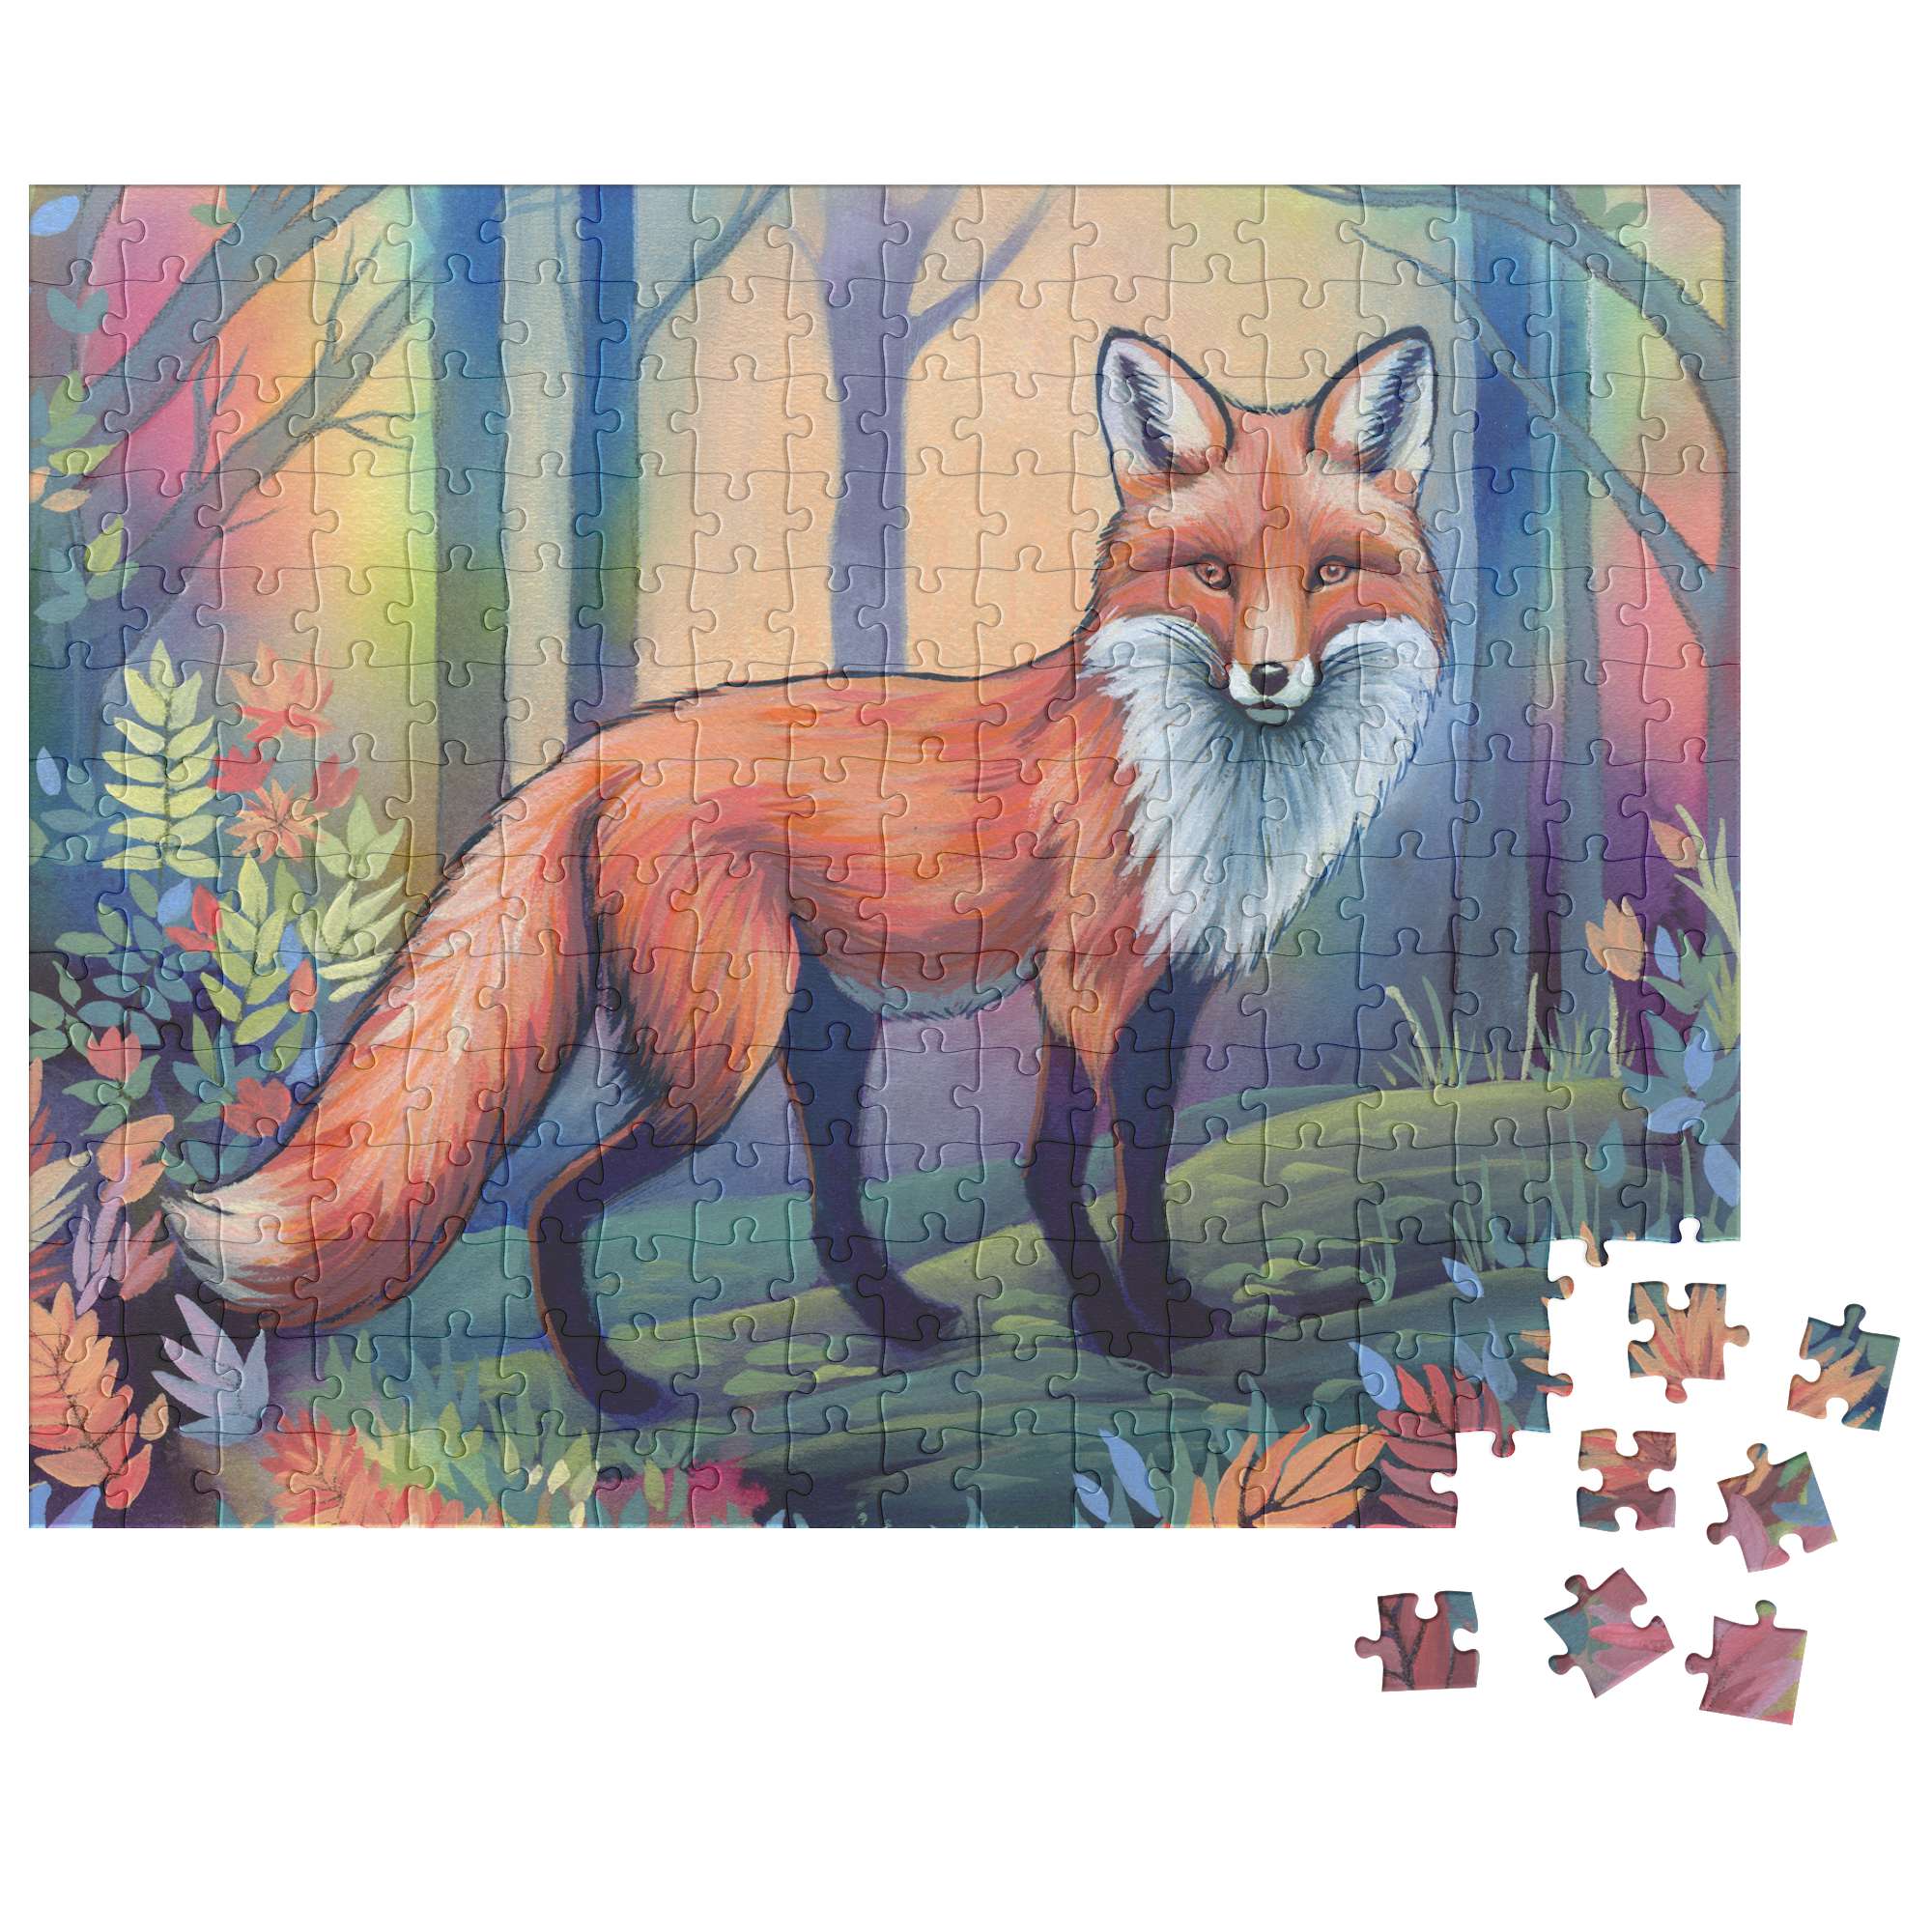 A 252 piece Fox Puzzle depicting a fox in a colorful forest setting, with a few pieces yet to be placed.